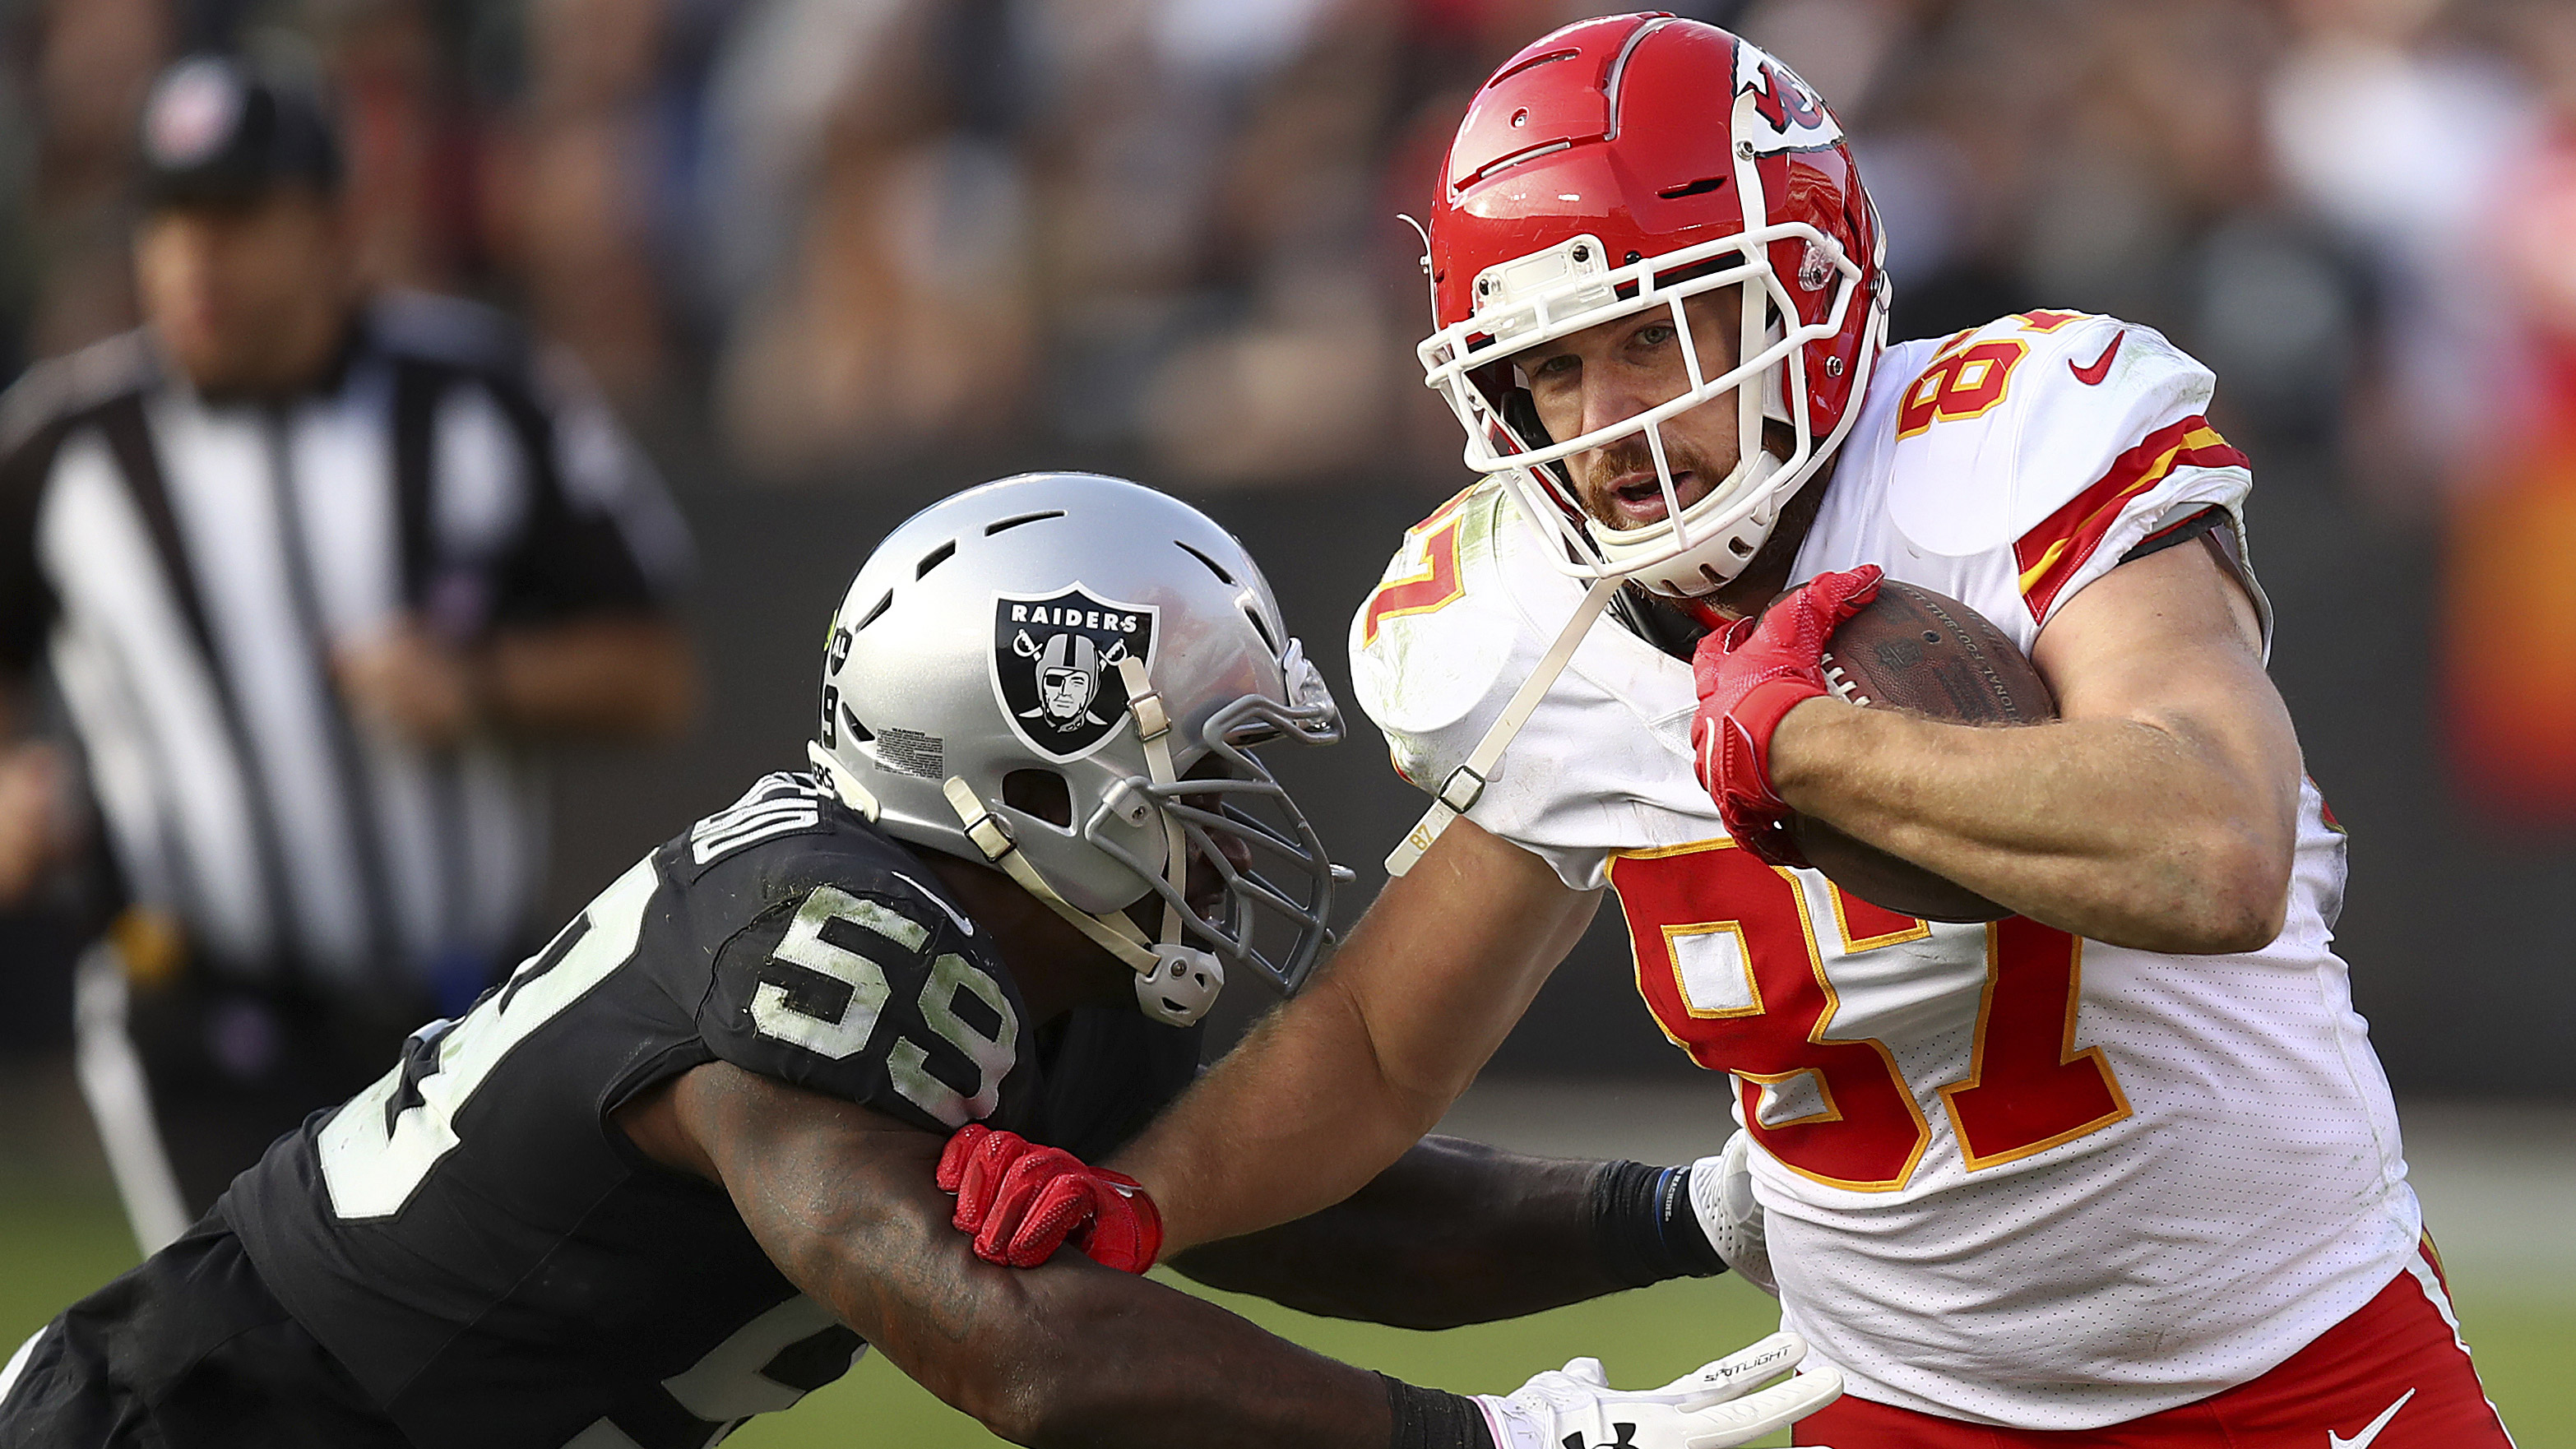 Chiefs hold on after unexpected push by Raiders in 40-33 win